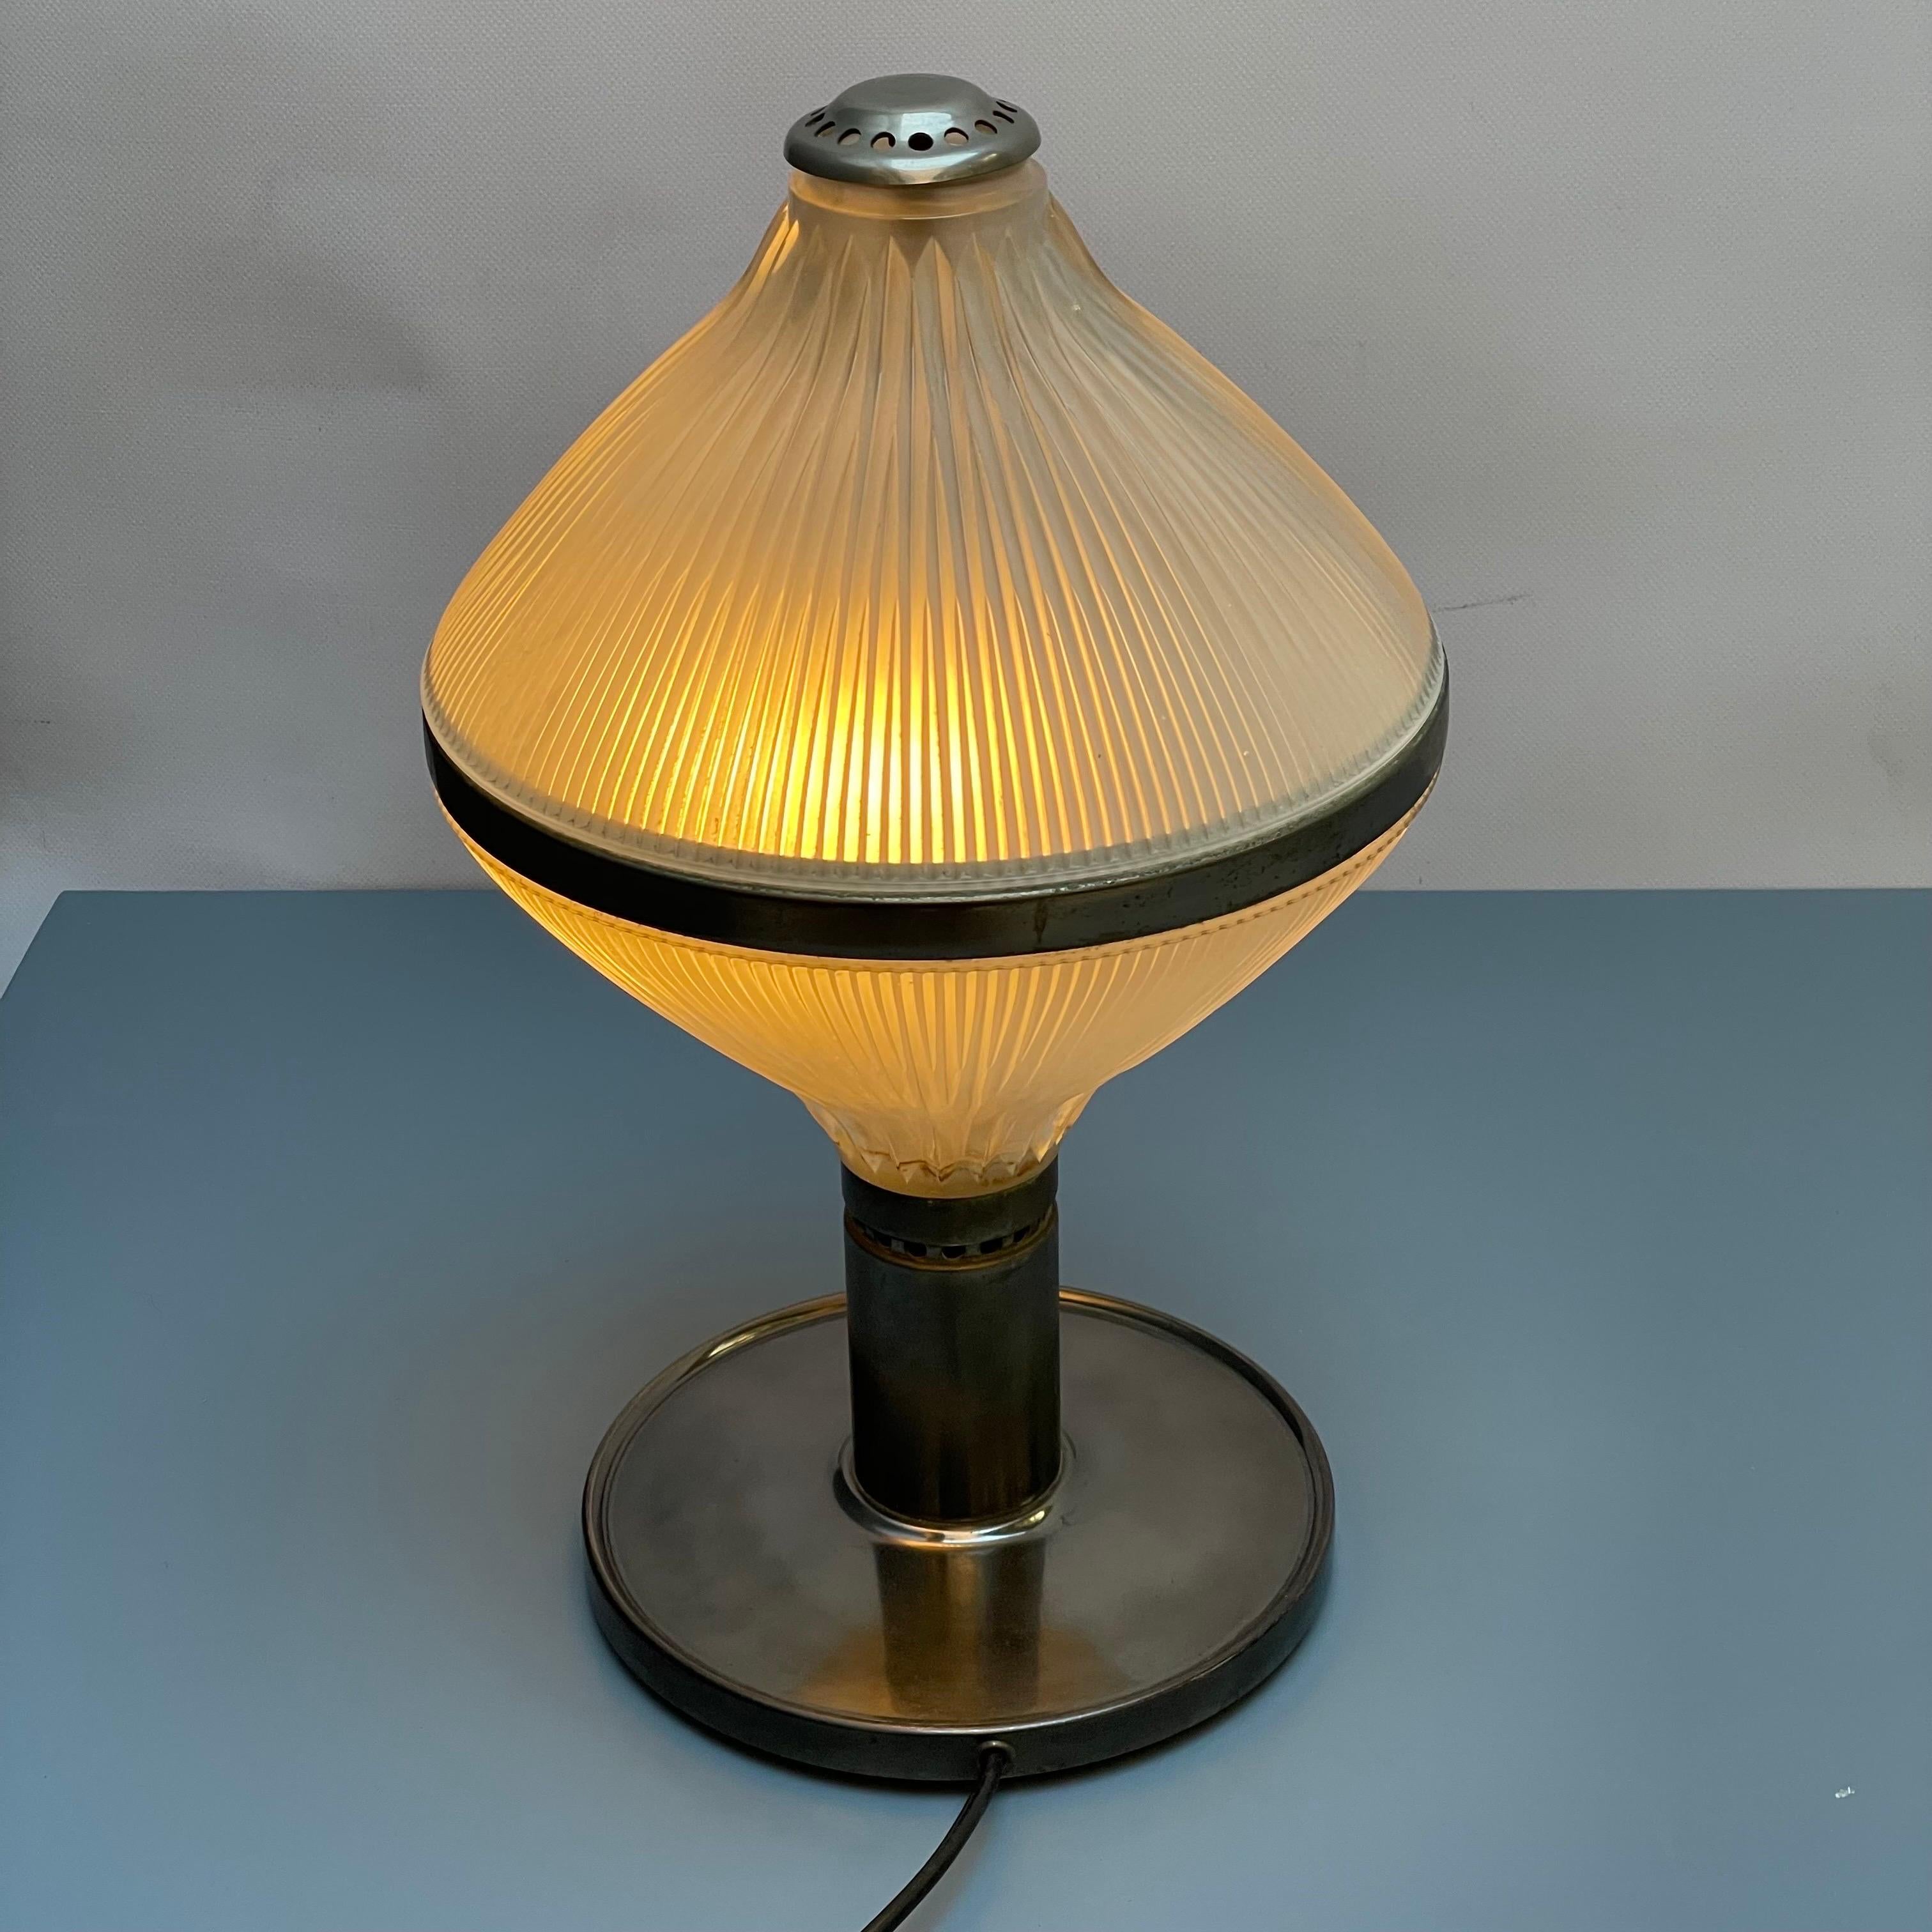 Polinnia table lamp, design Studio BBPR, Production Artemide, Milan 1950s. Studio BBPR was founded in Milan in 1932, bringing together architects and designers of different origins and cultures: Gian Luigi Banfi, Lodovico Barbiano di Belgiojoso,